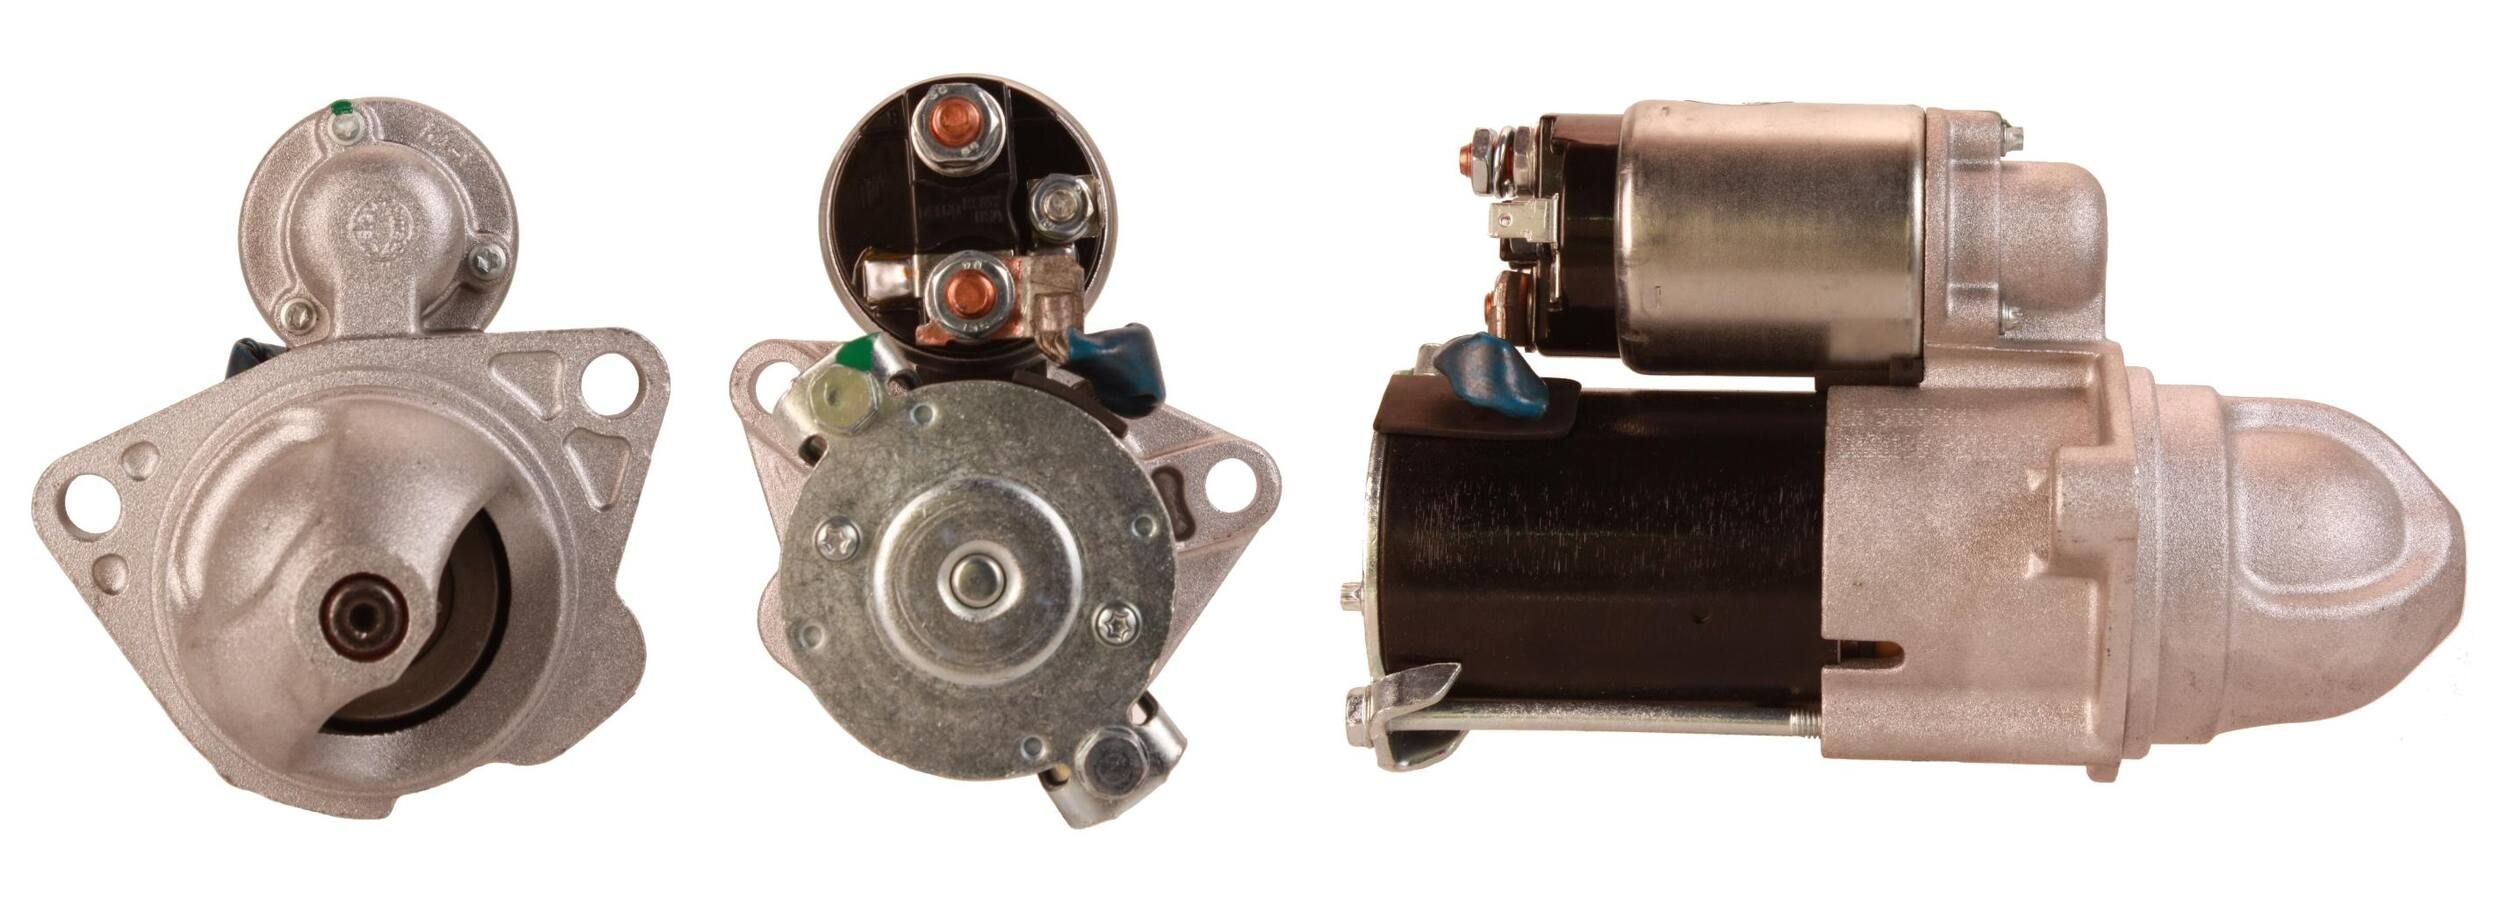 ELSTOCK 25-4012 Starter motor SAAB experience and price